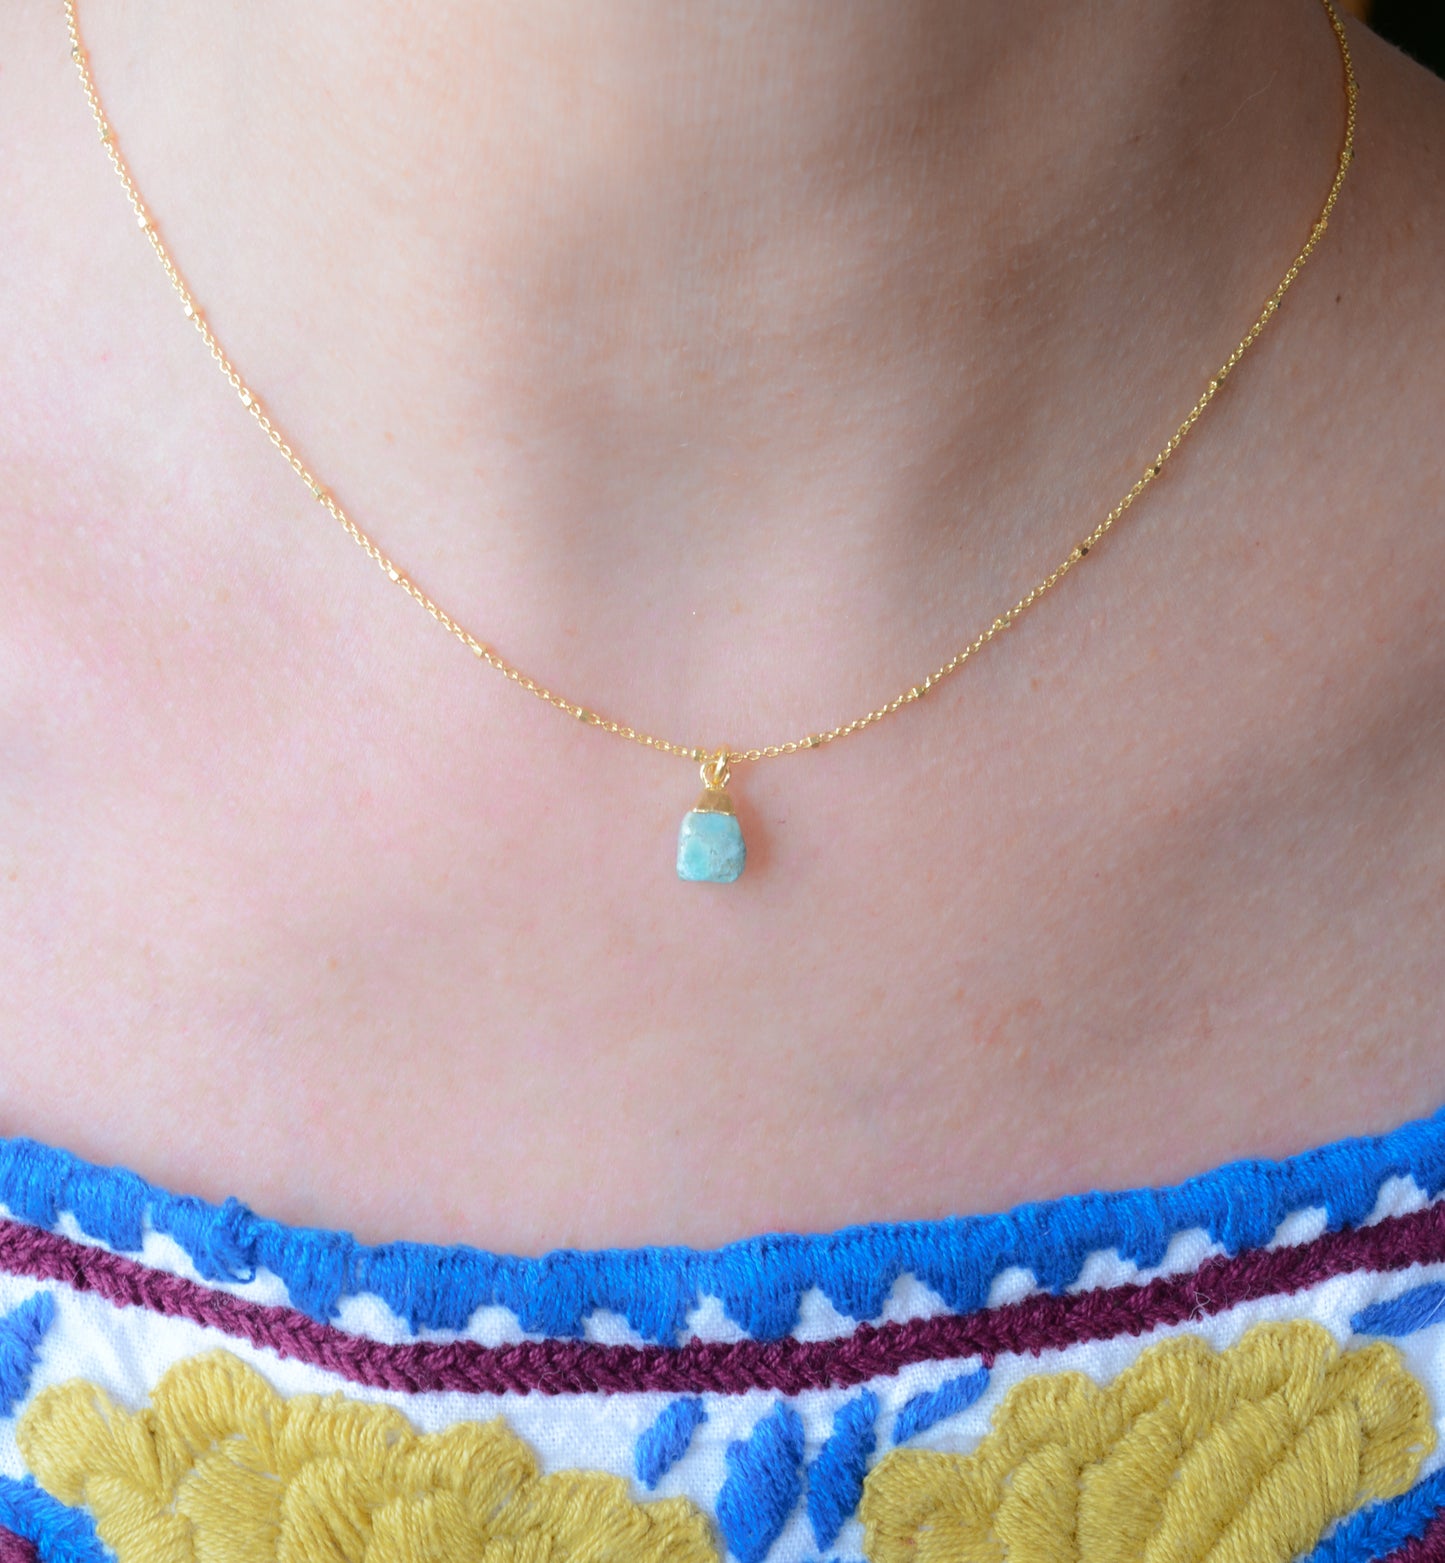 Gold Necklace With Rough Cut Kingman Turquoise Pendant